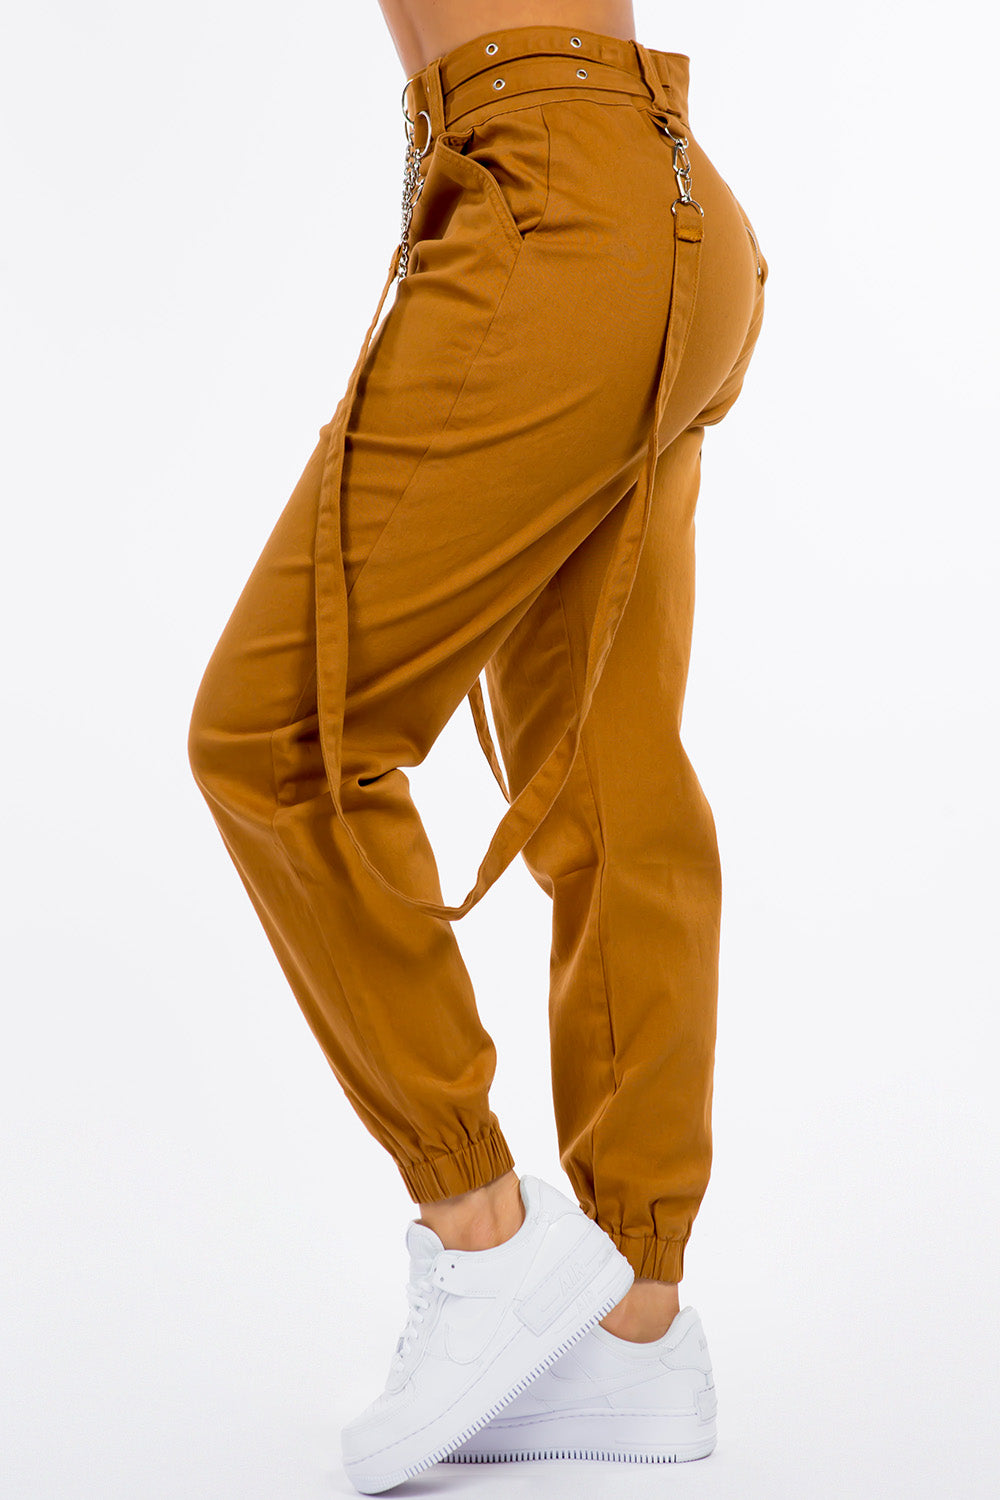 High Waist Suspender Jogger Pants With Chains